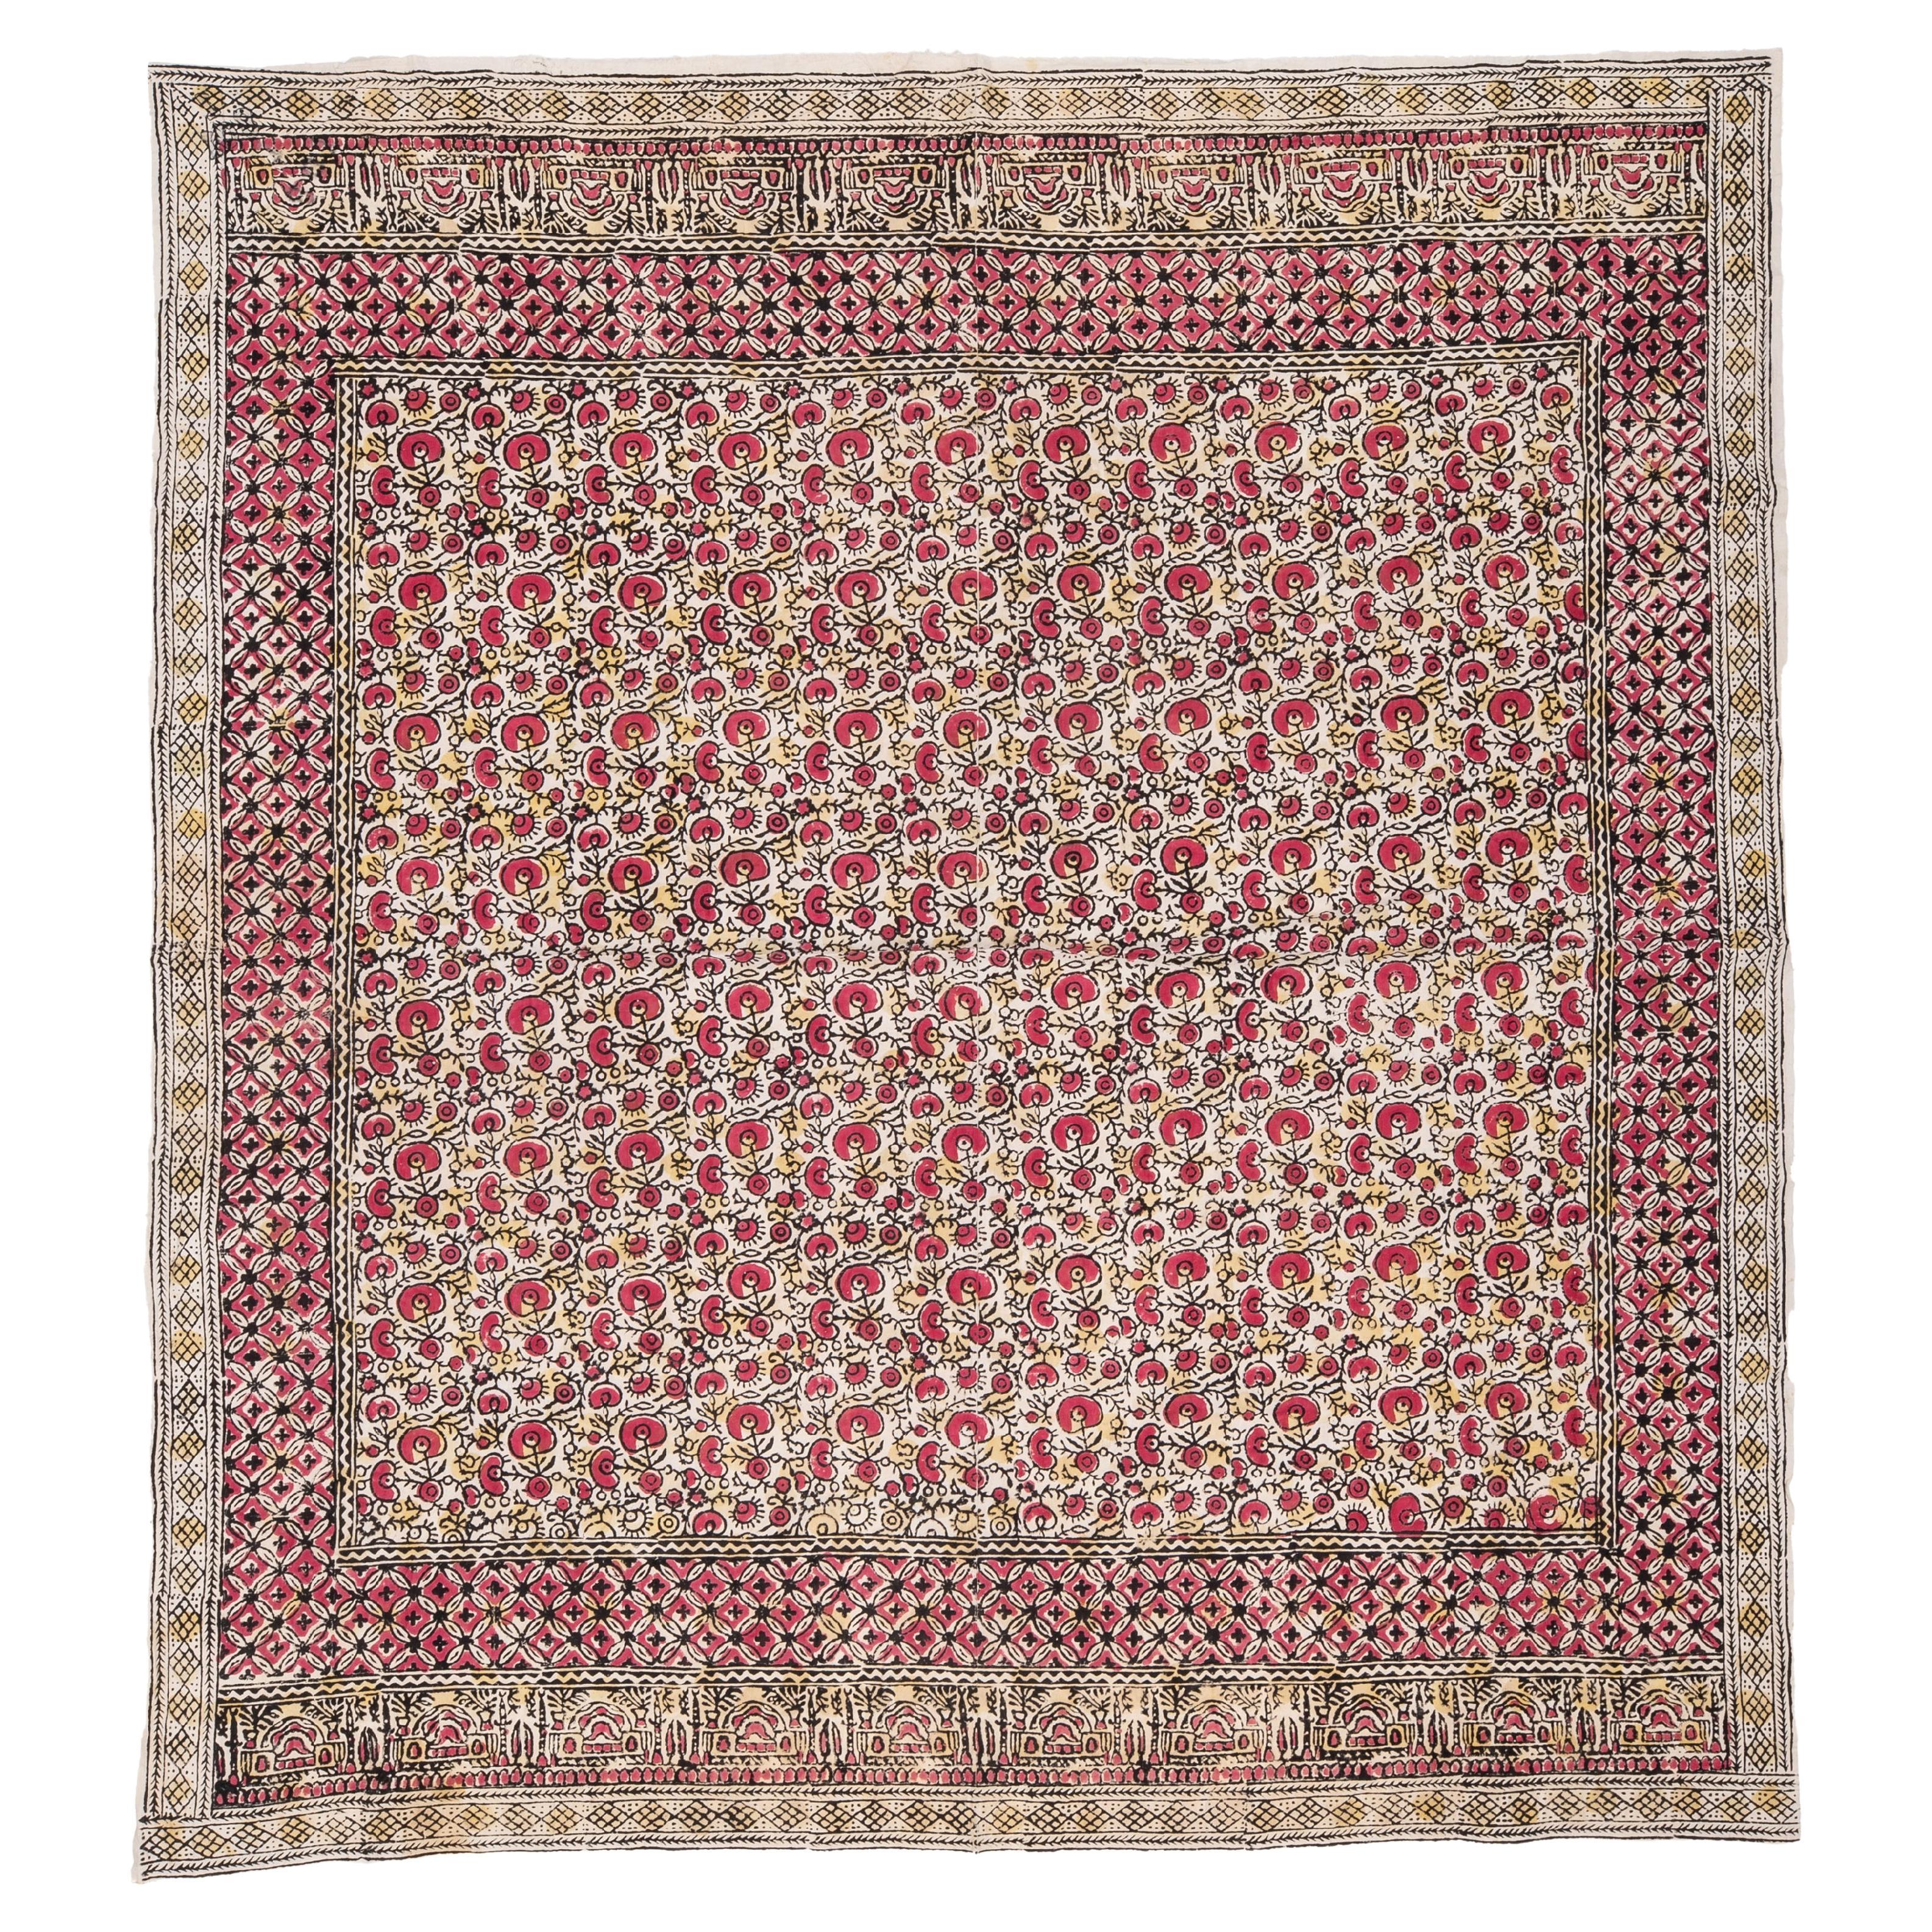 West Anatolian Rustic Hand Block Printed Quilt Top, Early 20th C.